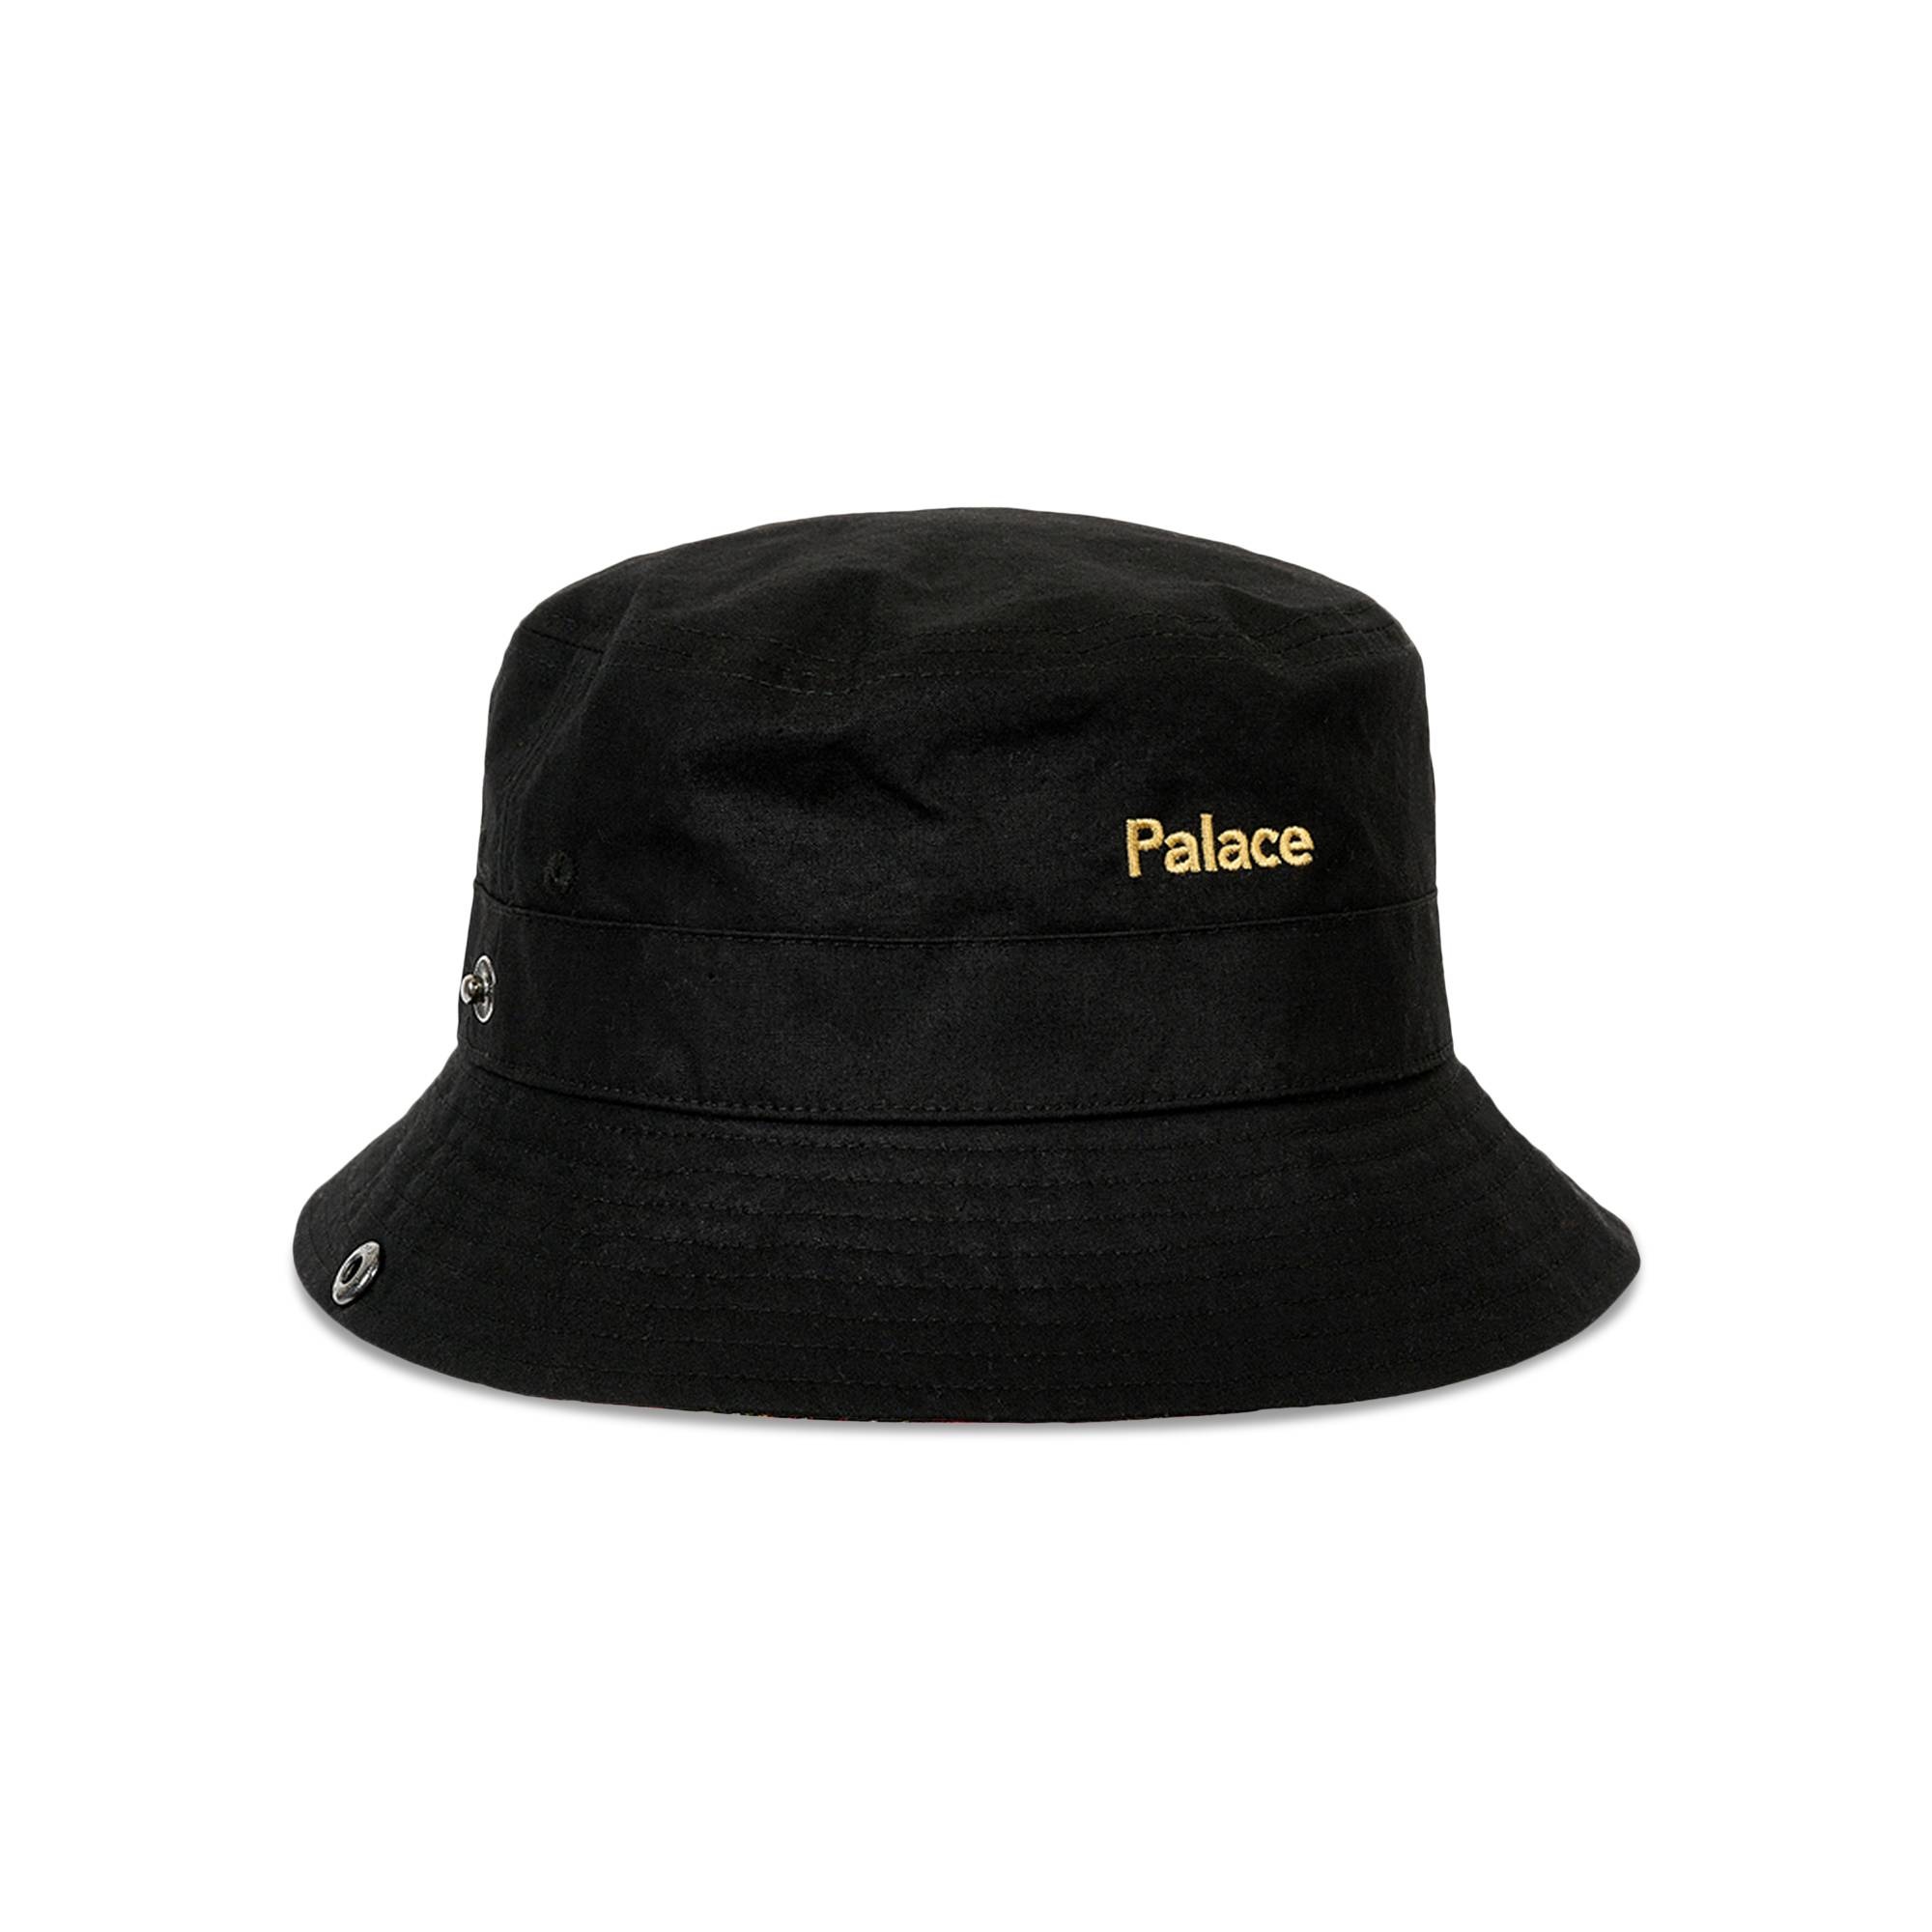 palace × barbour sports hat black バケハ